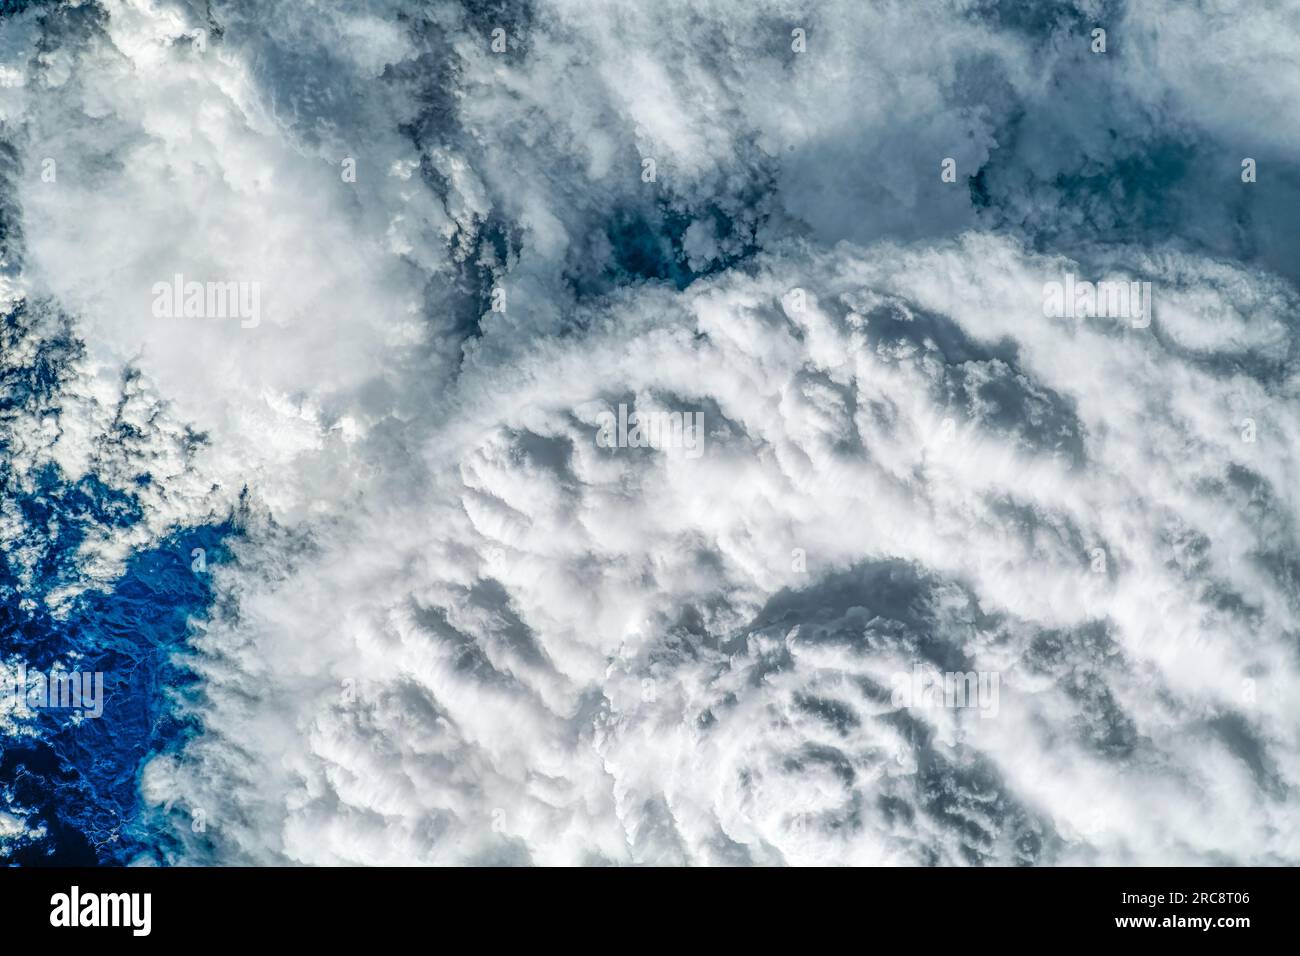 Storm clouds over Honduras. Sciences of meteorology, weather, climate change. Image by NASA. Media usage guidelines: https://www.nasa.gov/multimedia/g Stock Photo